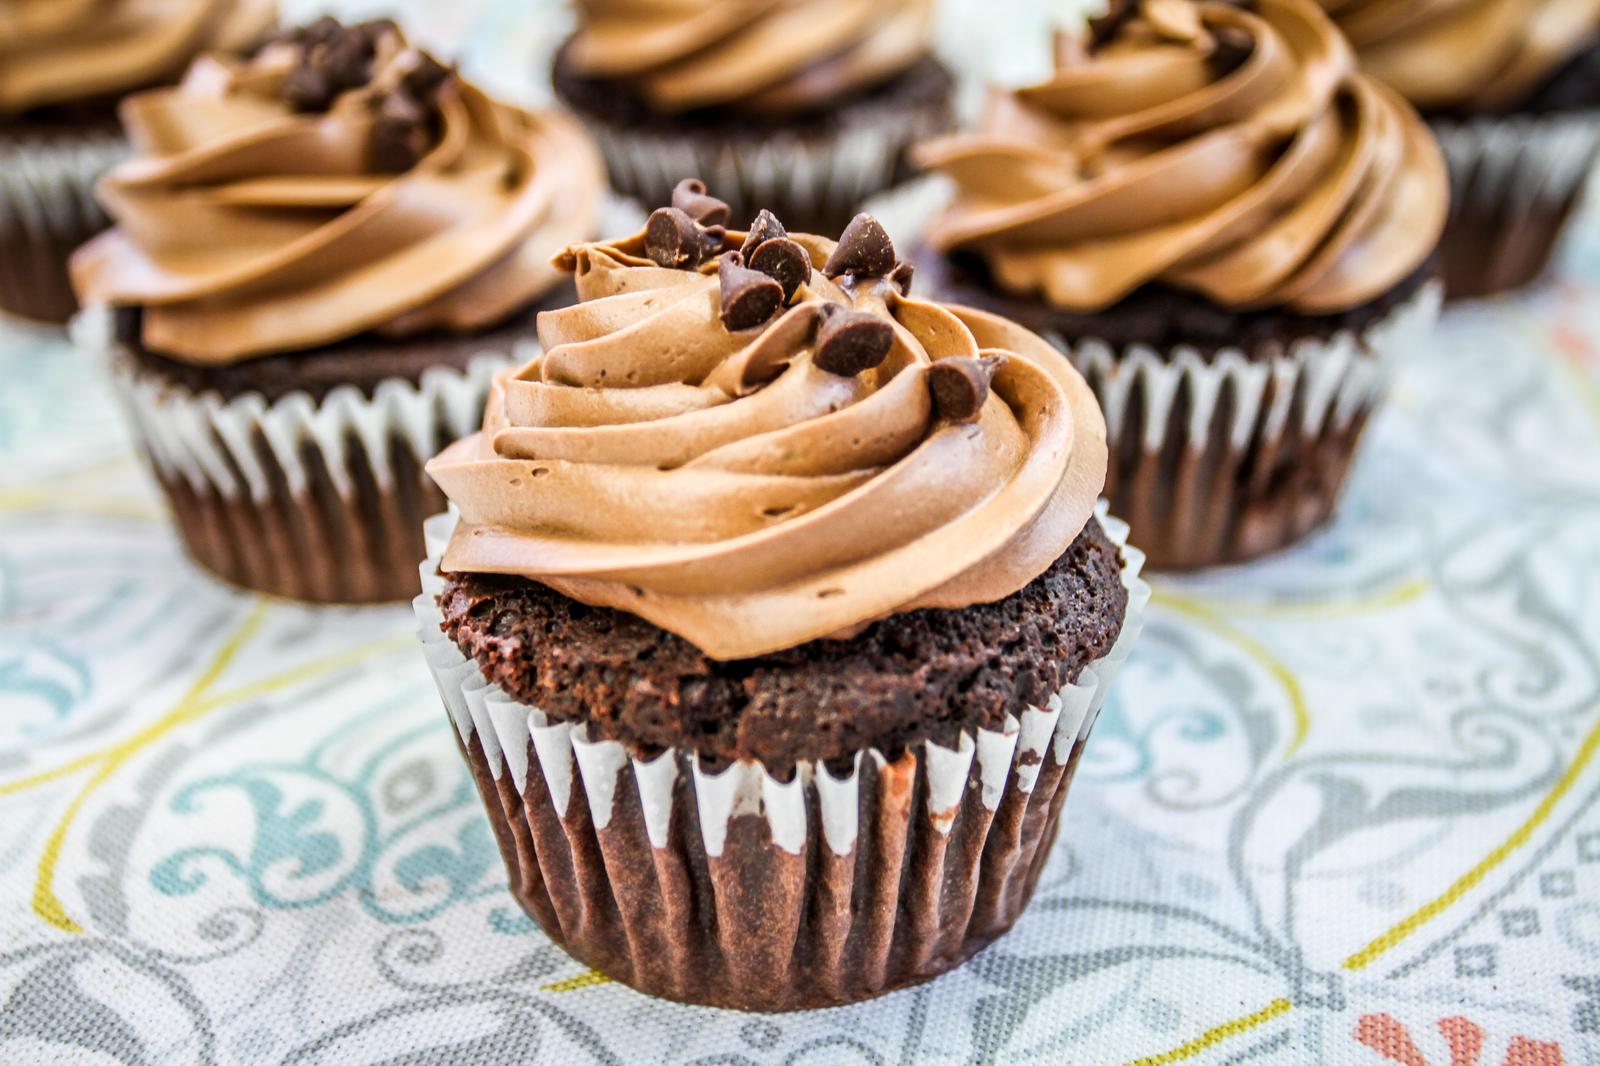 What Dessert Flavor Are You? Peanut butter and chocolate chip cupcake